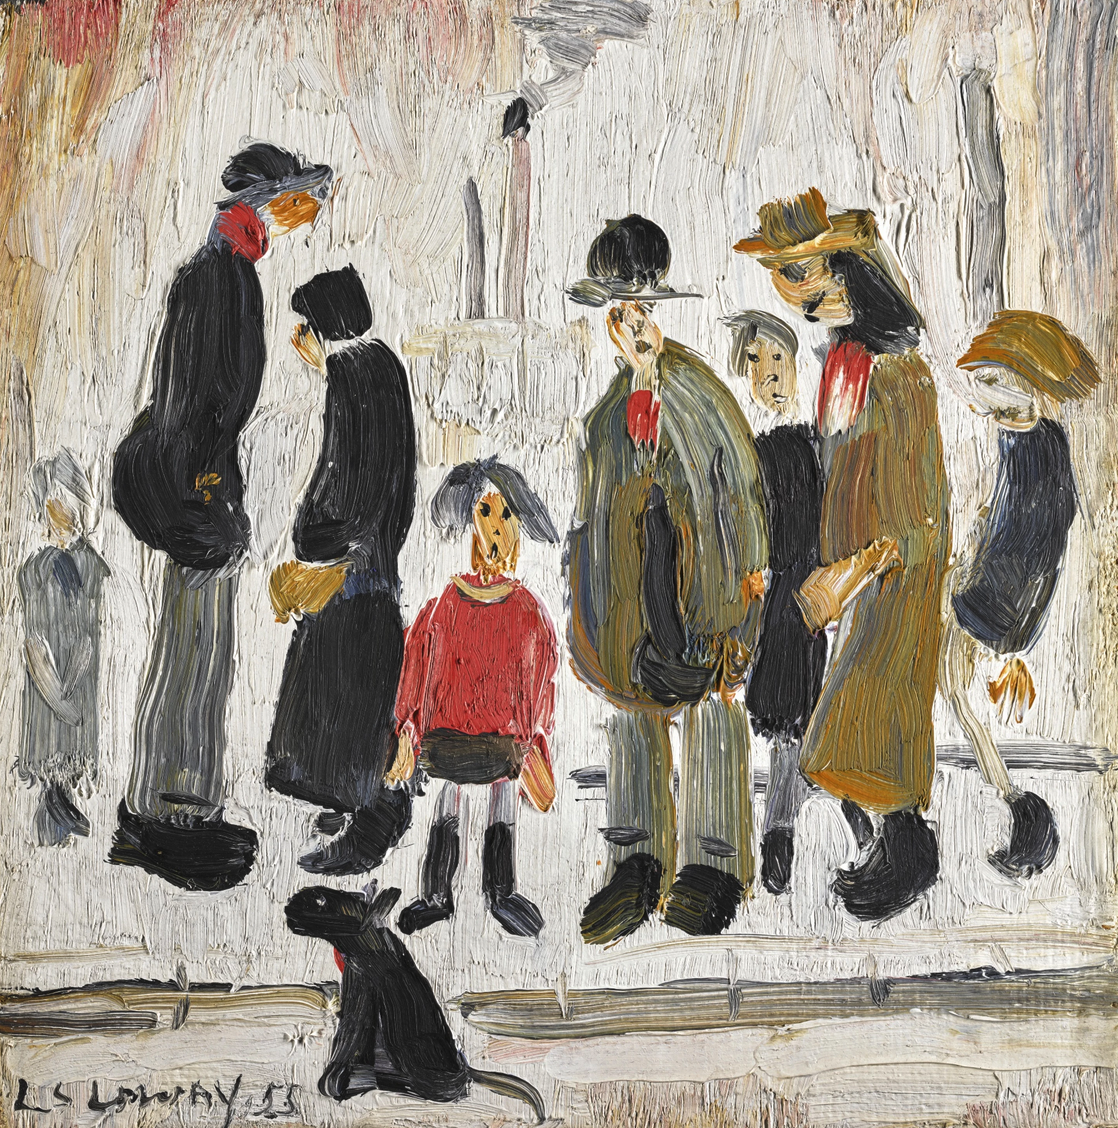 Figures in the Street (1955) by Laurence Stephen Lowry (1887 - 1976), English artist.